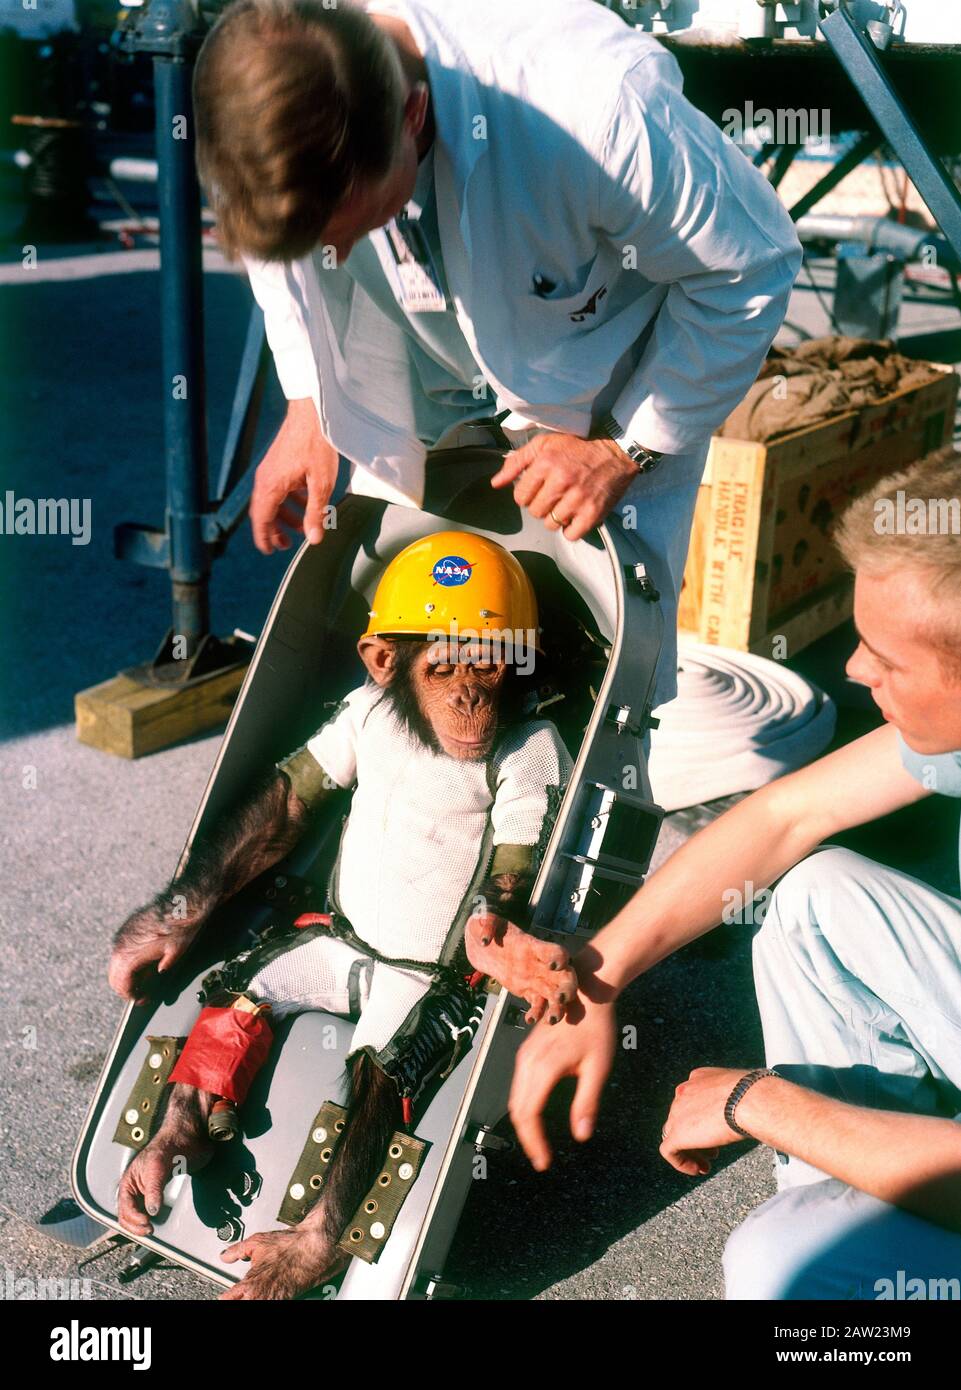 Ham, also known as Ham the Chimp and Ham the Astrochimp, was a chimpanzee and the first hominid launched into space, on January 31, 1961, as part of the U.S. space program's Project Mercury Stock Photo